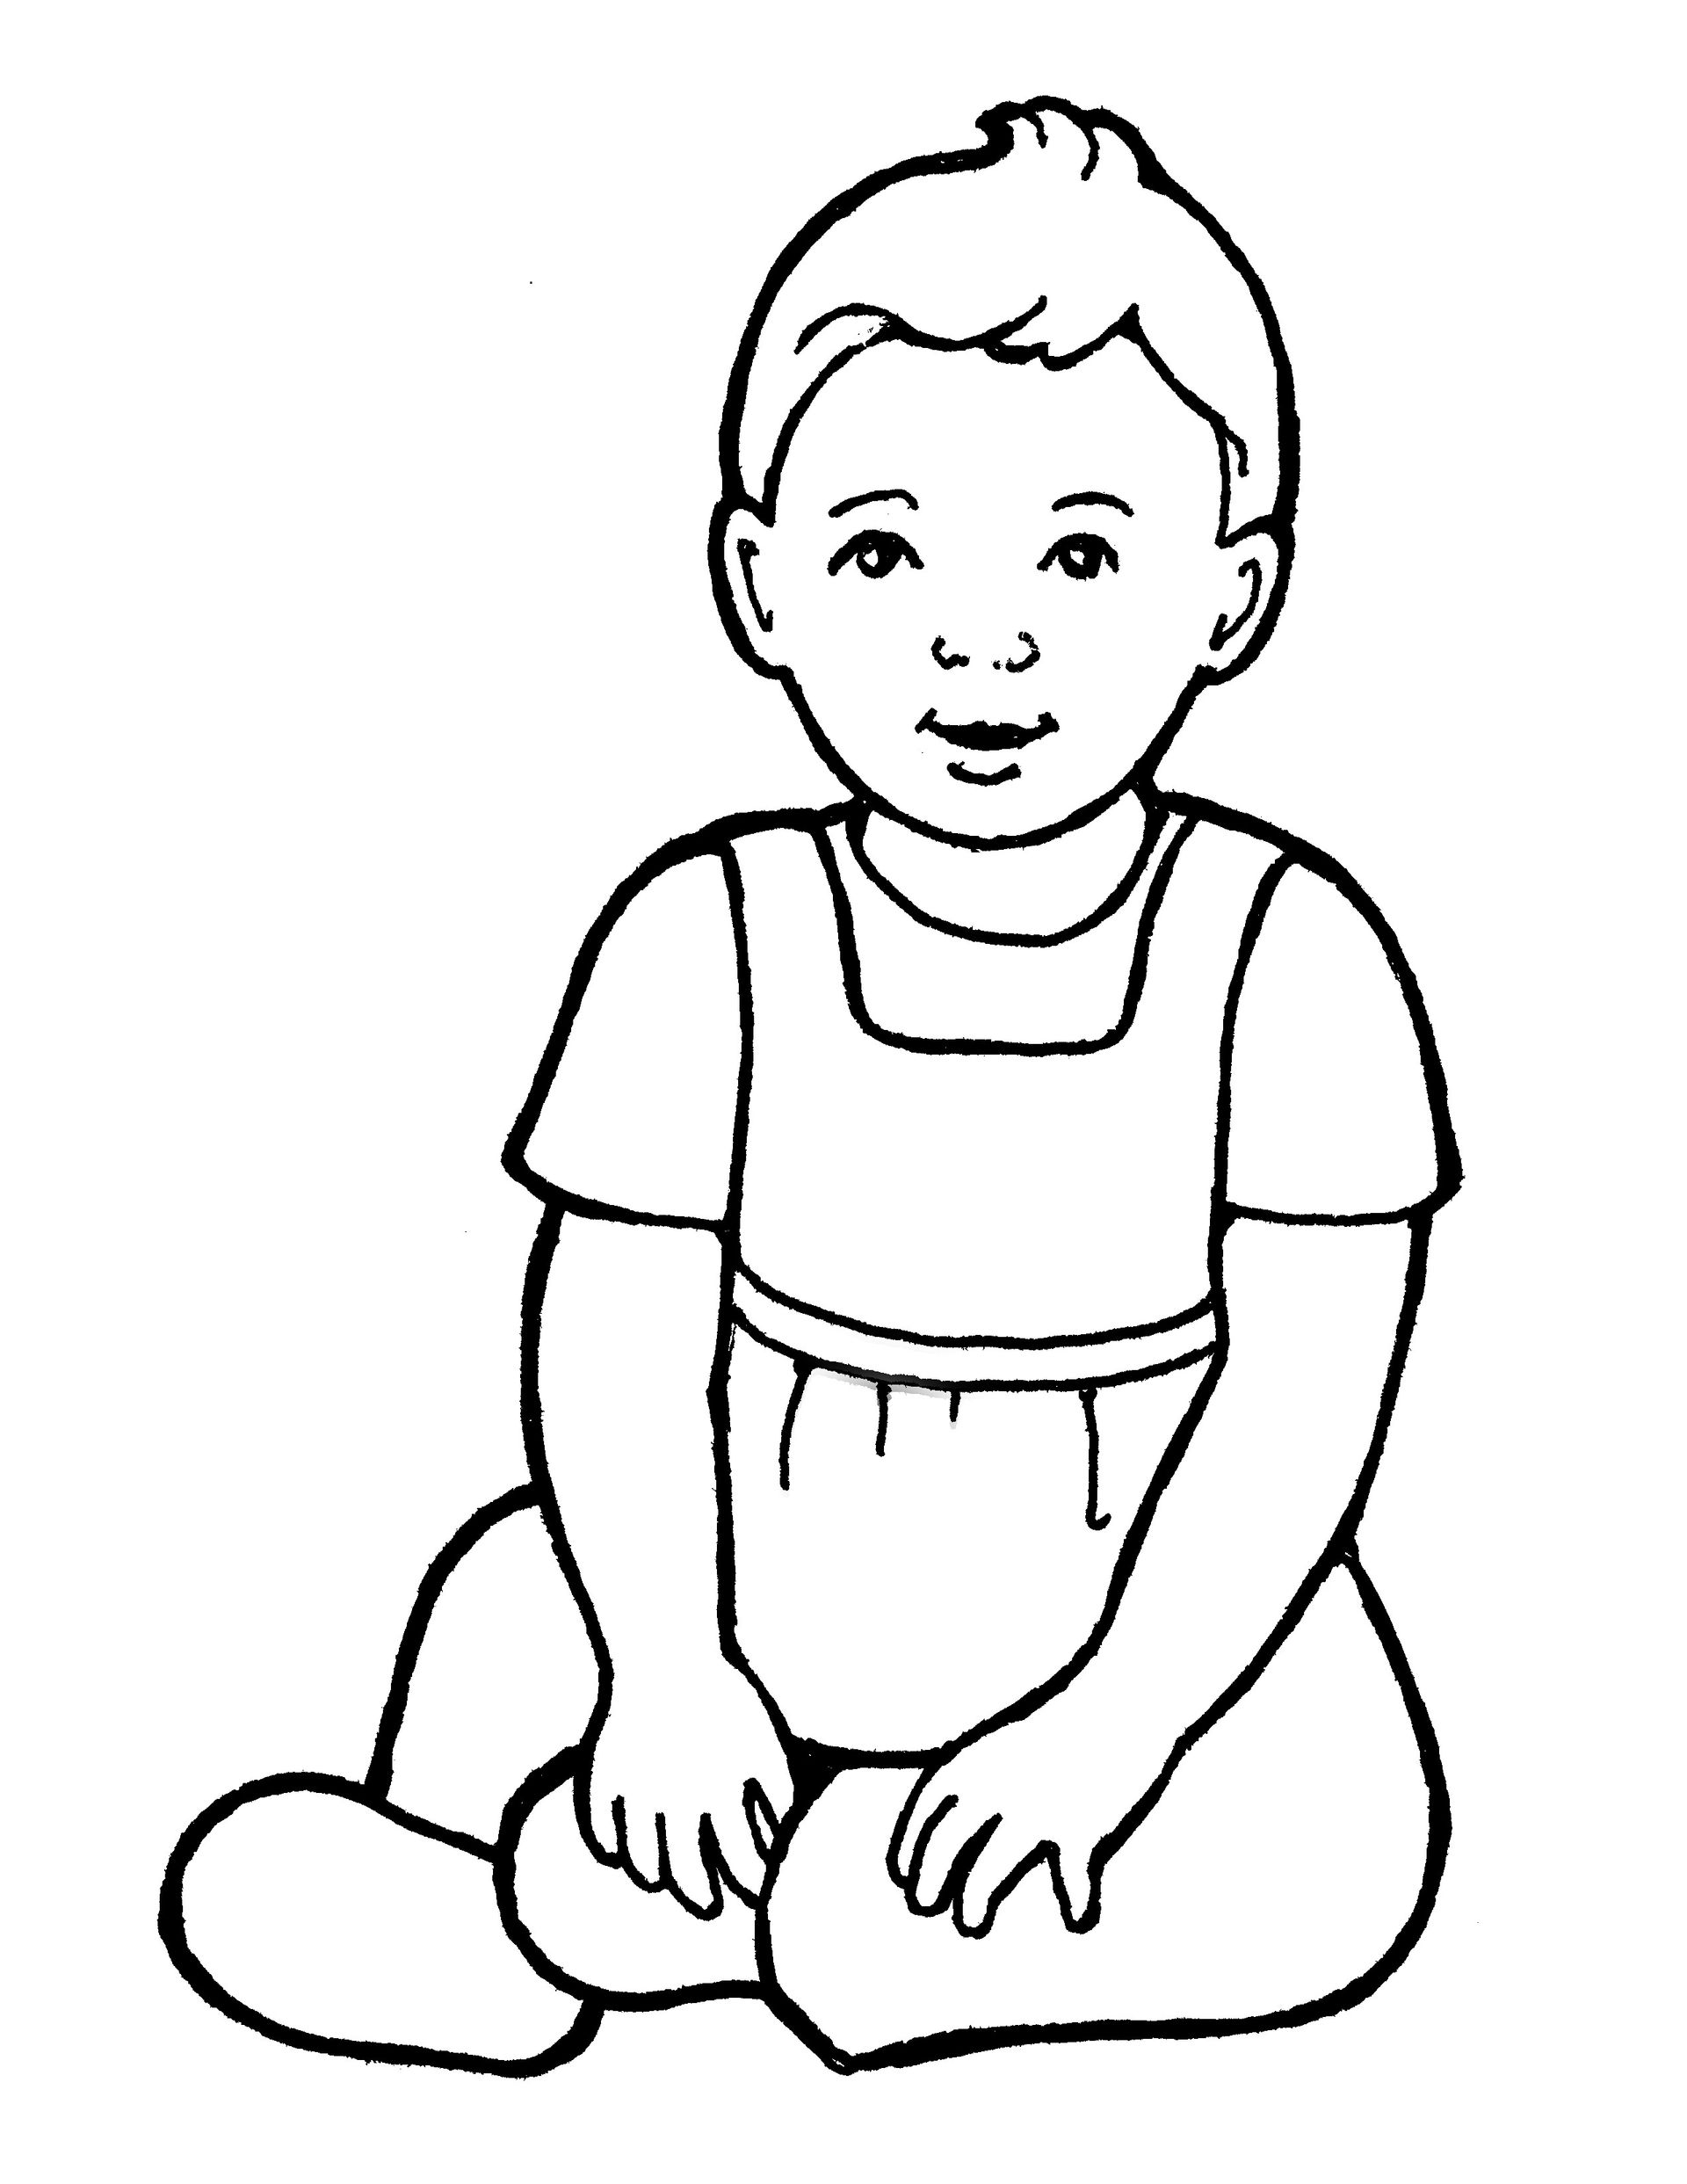 An illustration of a baby sister.